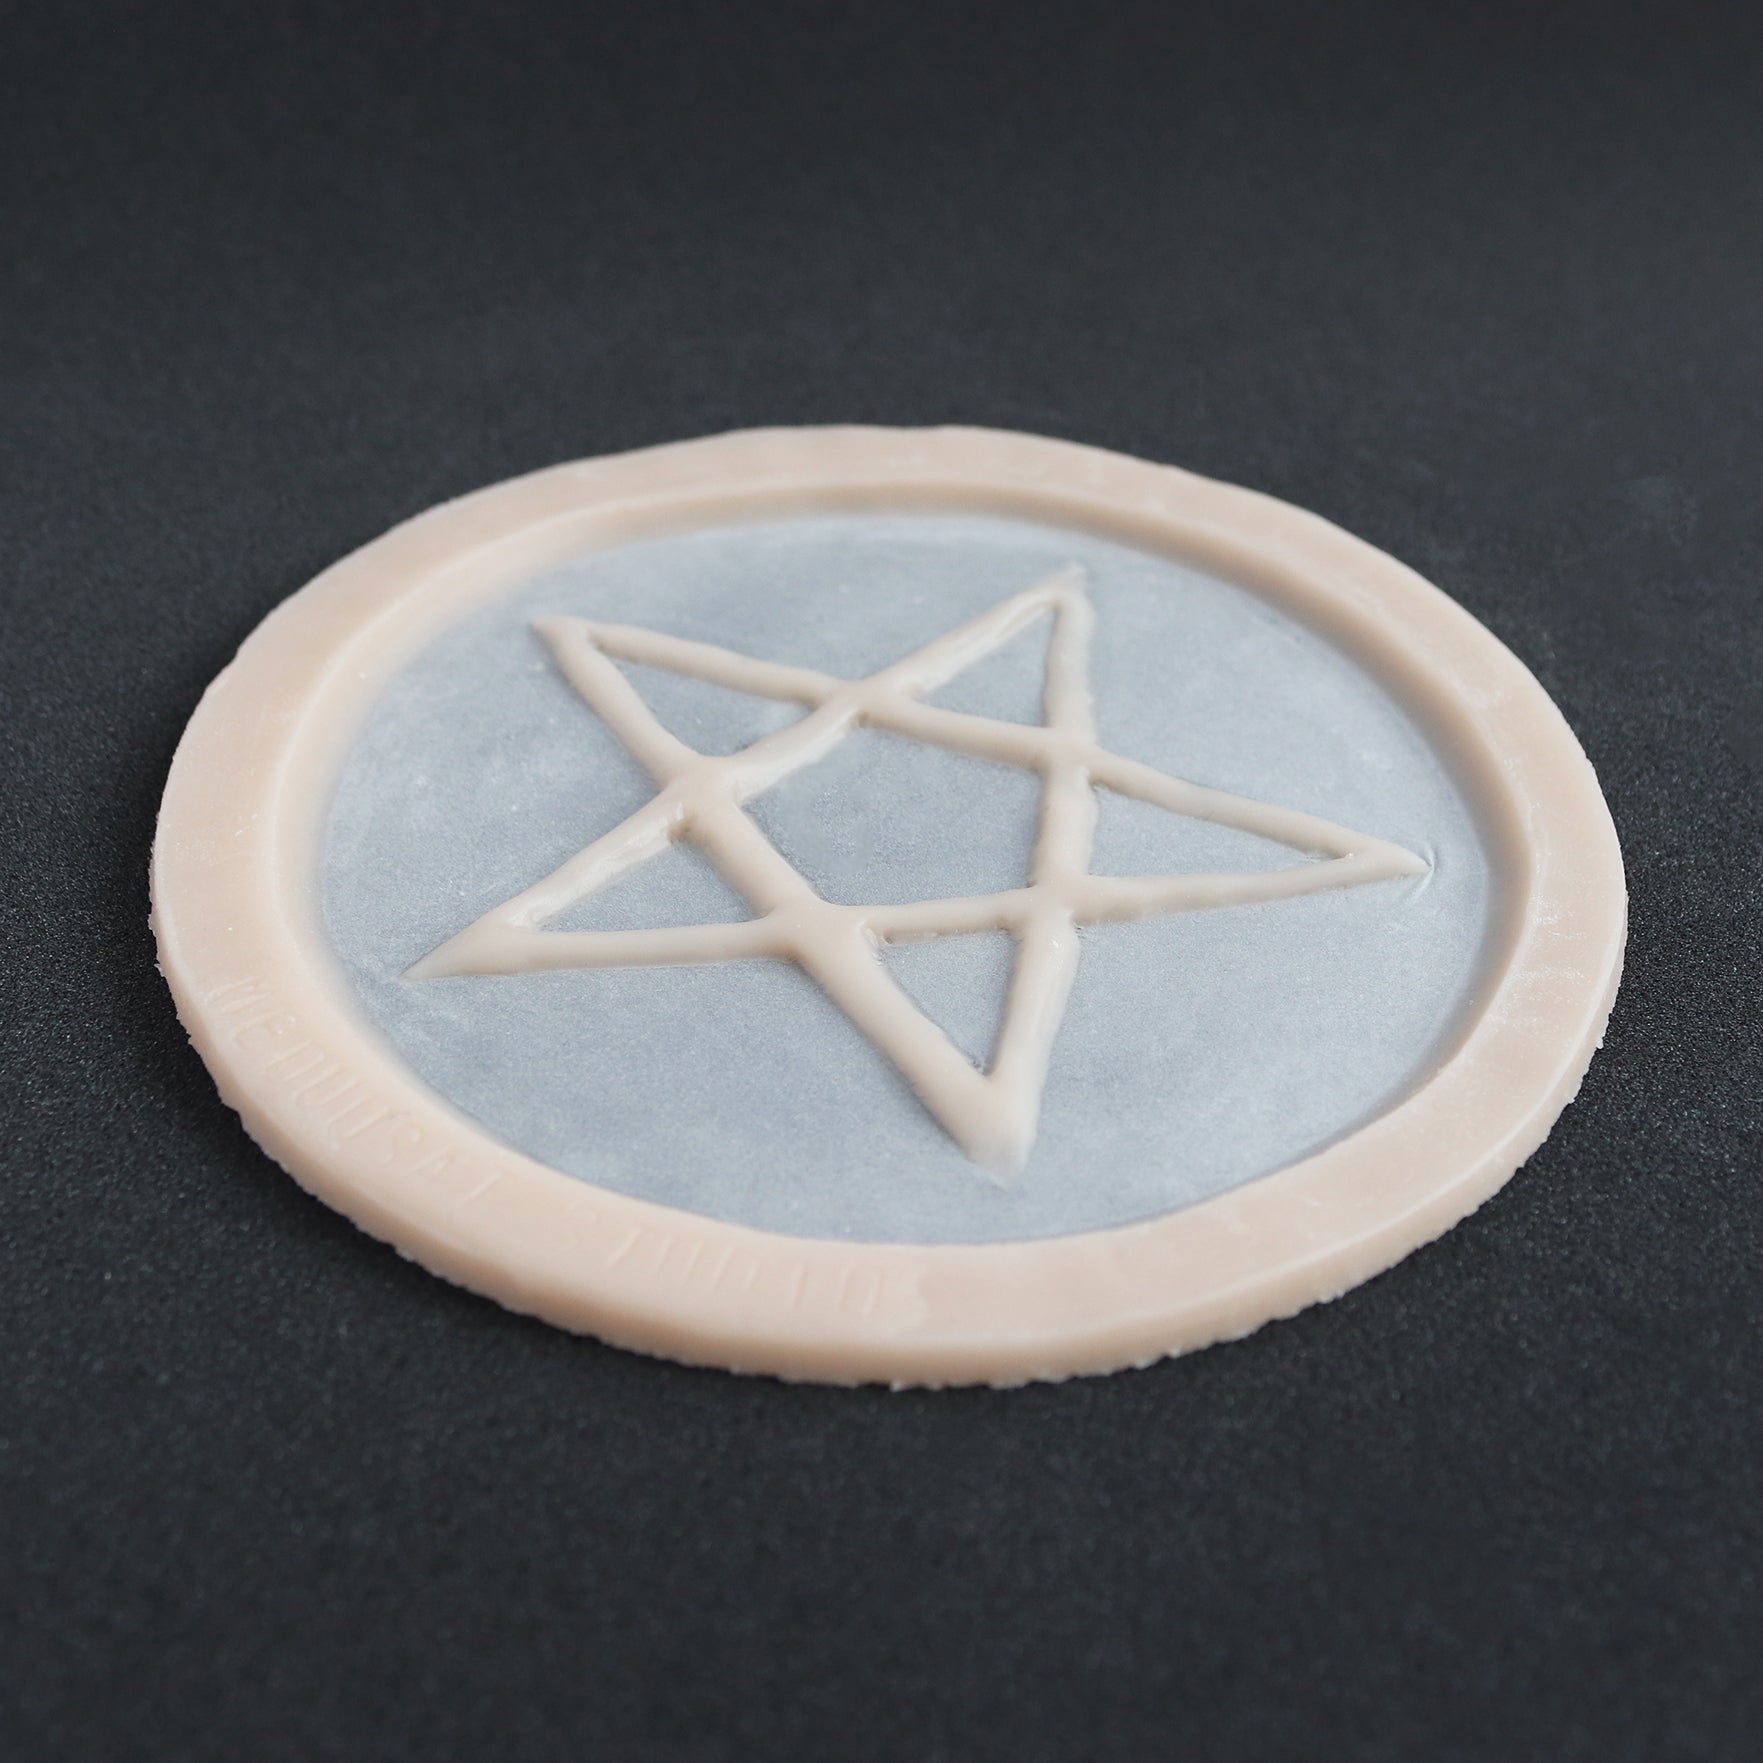 Pentagram Scarification - Silicone makeup prosthetic in vanilla shade on a black surface